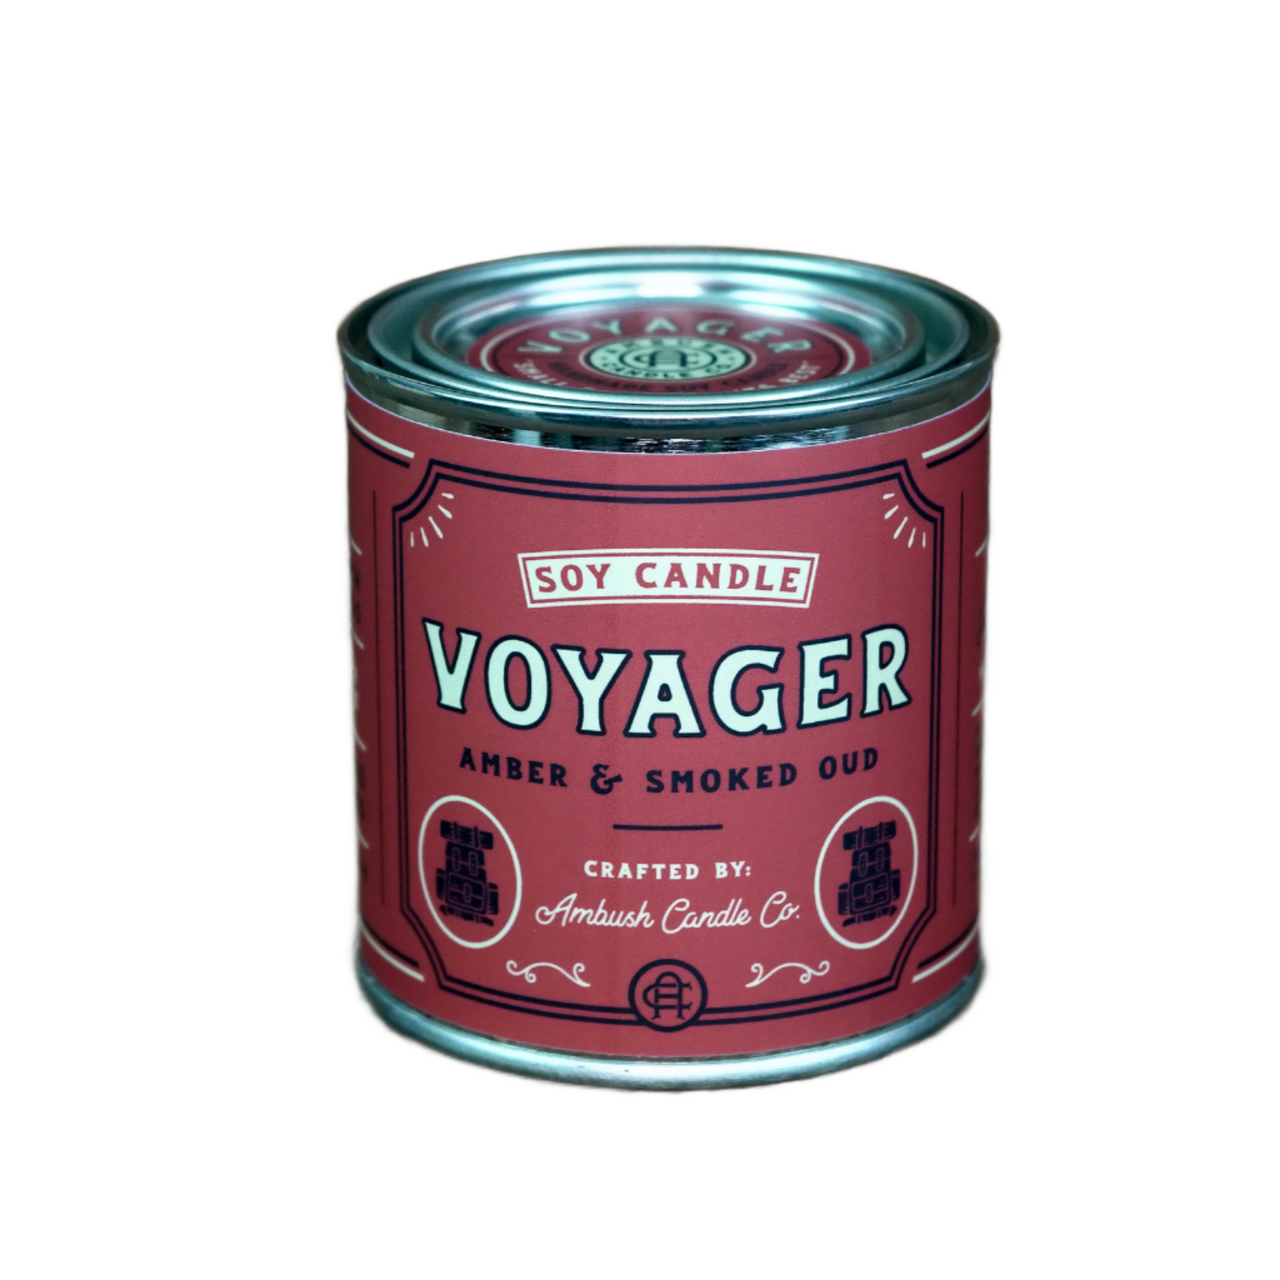 Voyager - Amber & Smoked Oud Soy Candle